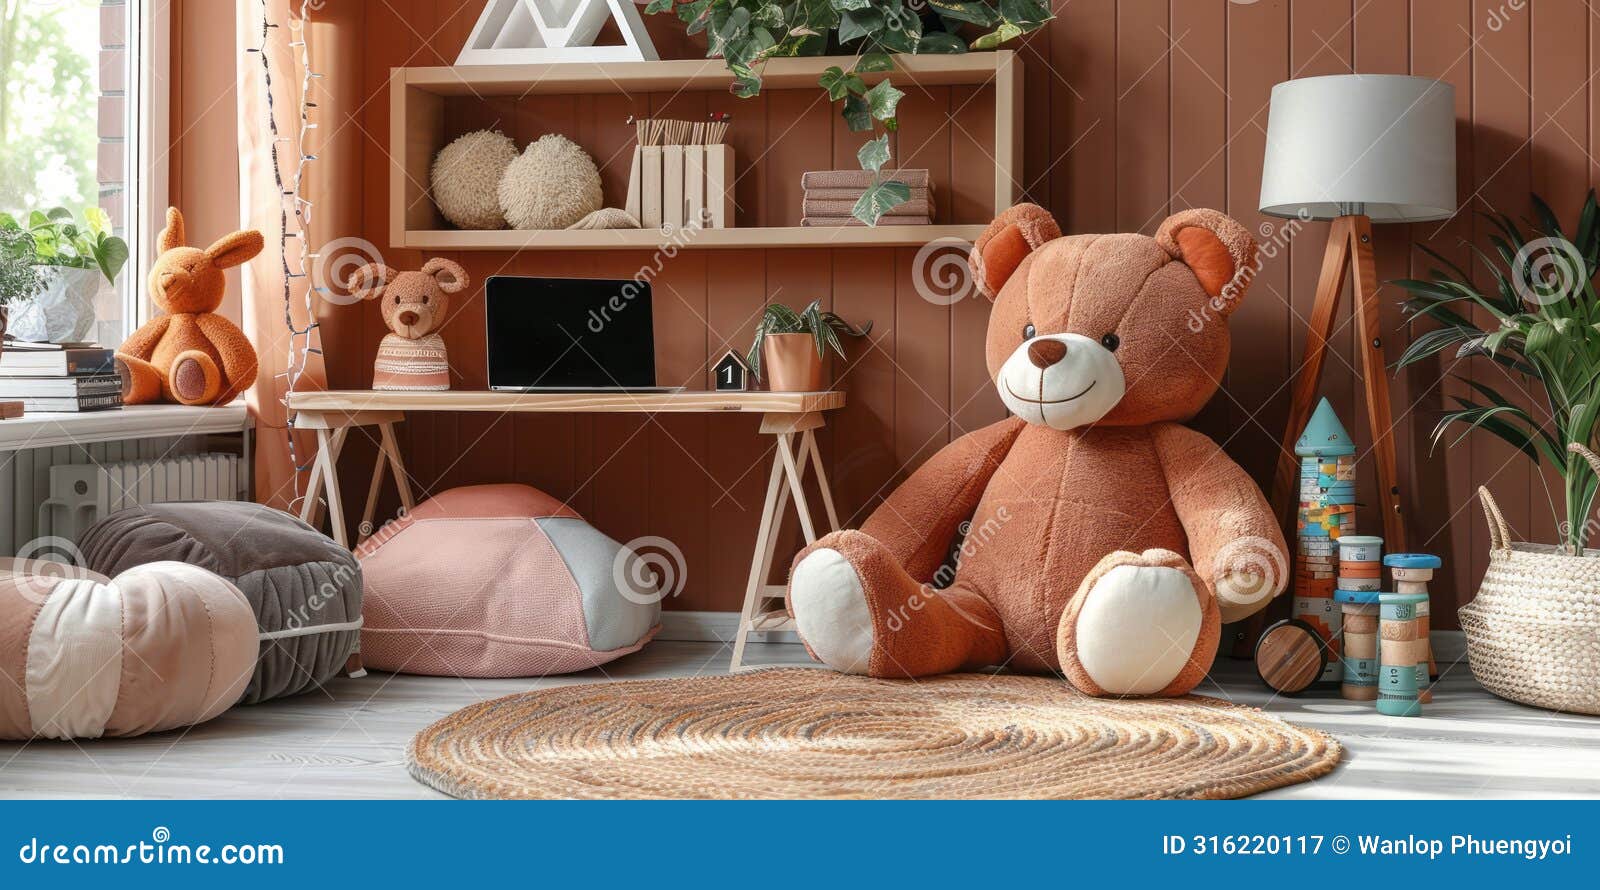 this is a cozy and inviting playroom for children. the room is decorated in warm, neutral colors, and there are a variety of toys